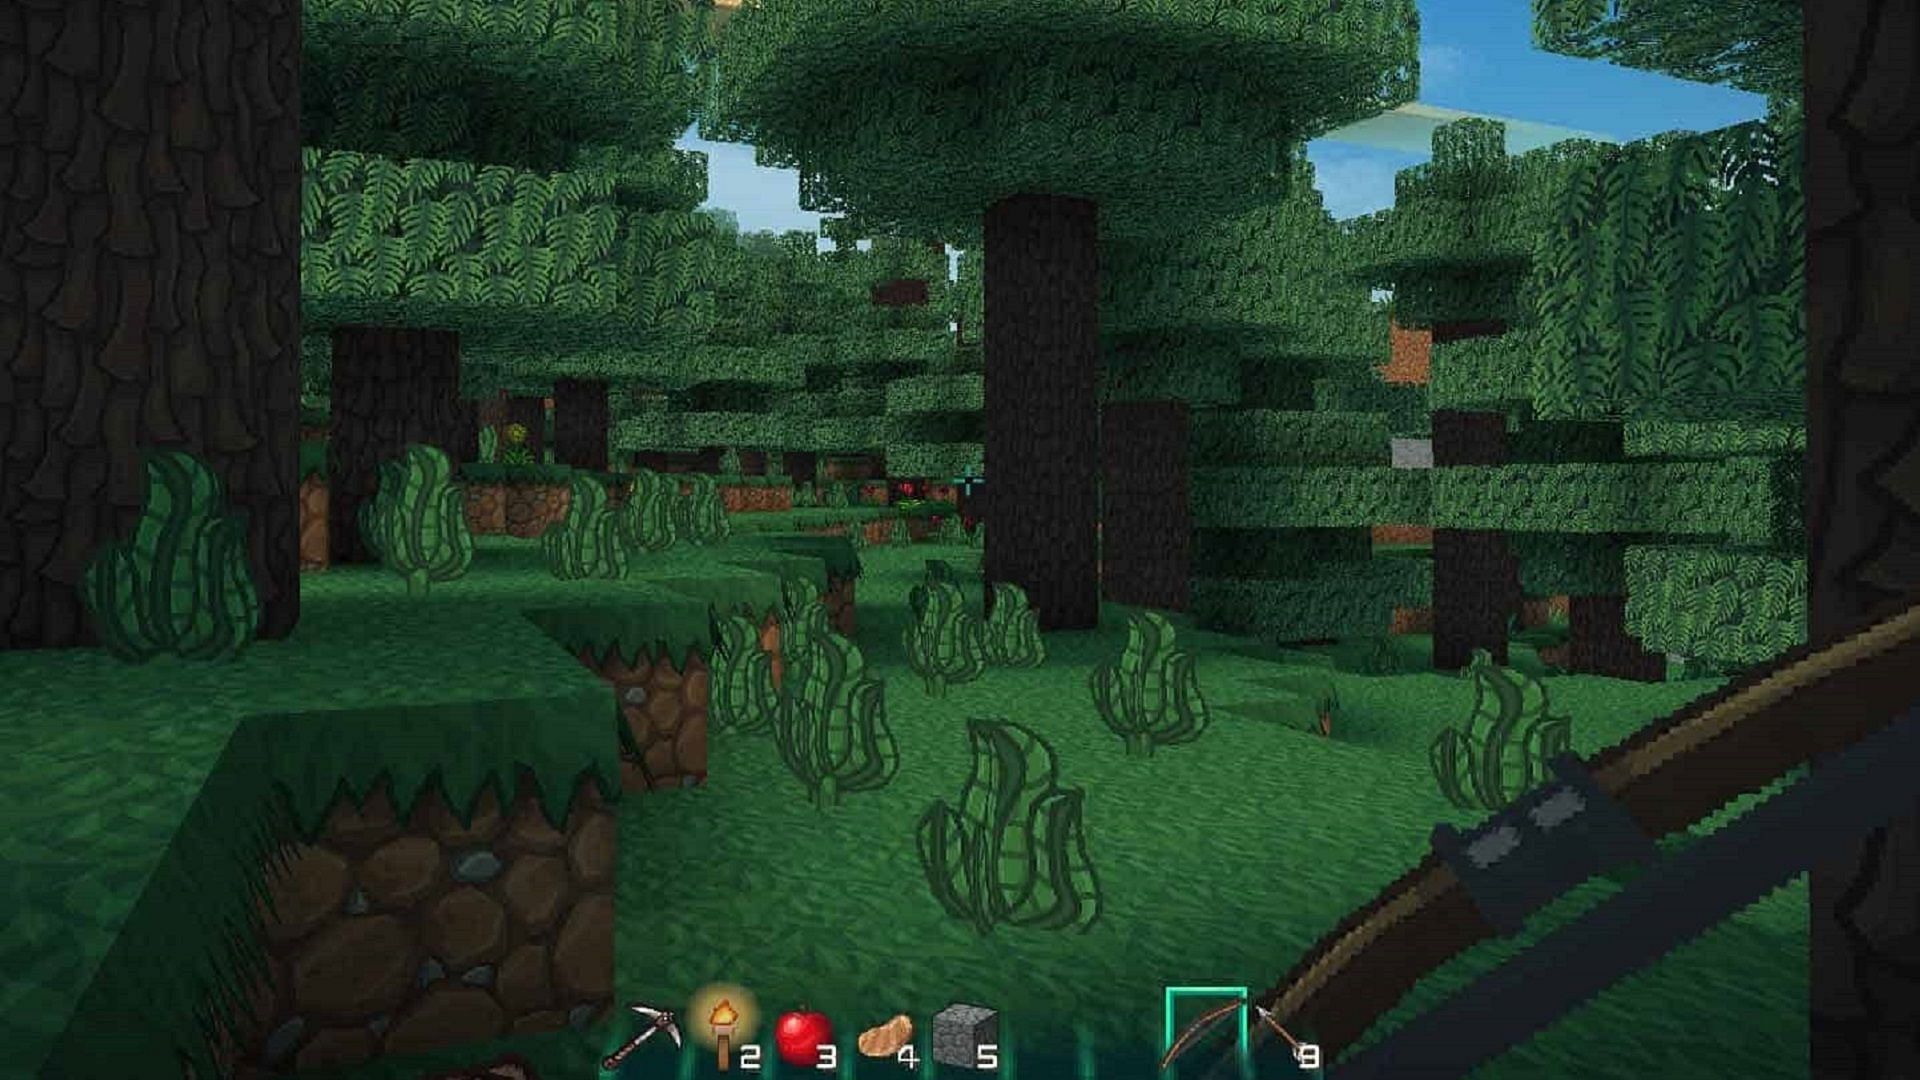 Triton is both detailed and colorful in Minecraft (Image via Ringoster/Resourcepack.net)